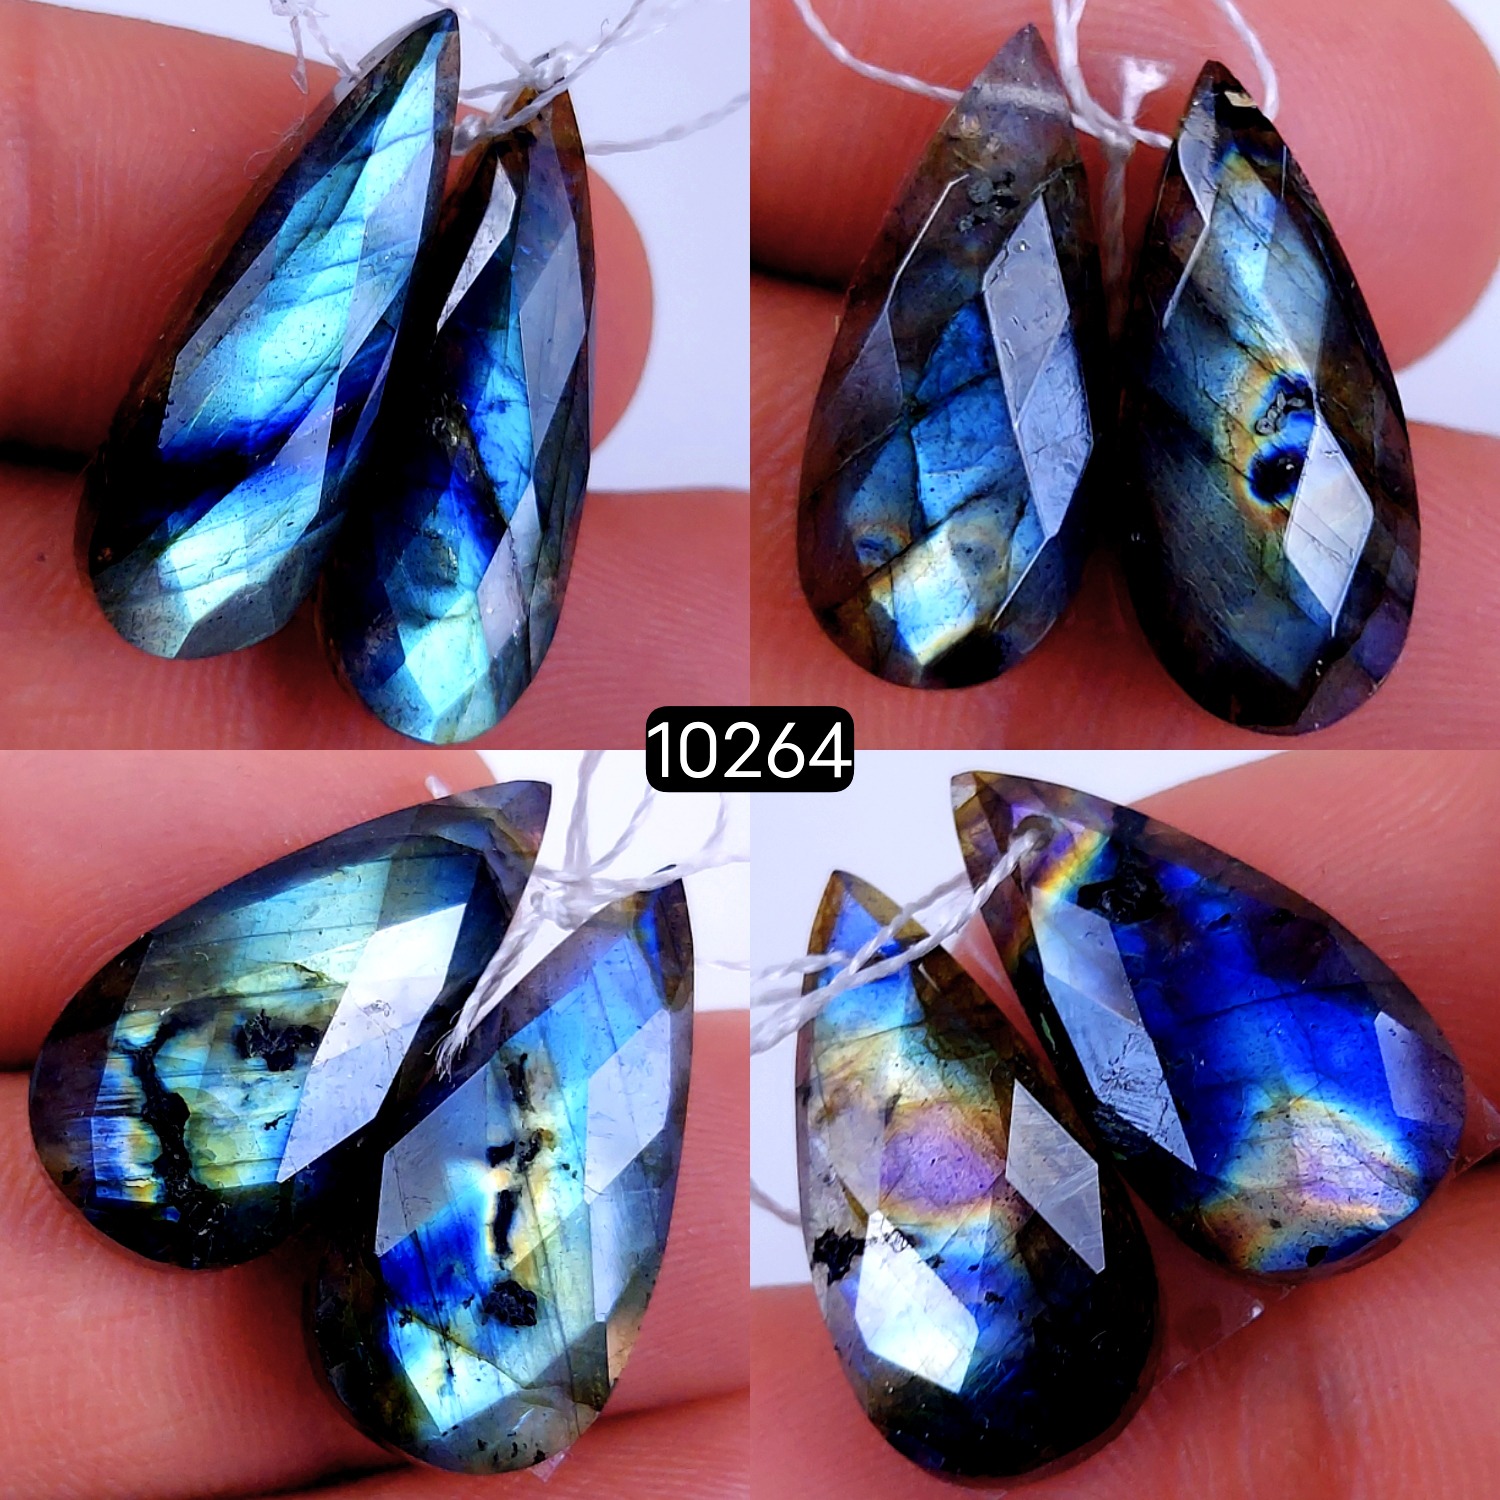 4Pair 84Cts Natural Labradorite Faceted Crystal Drill Dangle Drop Earring Pairs Silver Earrings Rose cut Labradorite Hoop Jewelry  25X12 20X9mm #10264